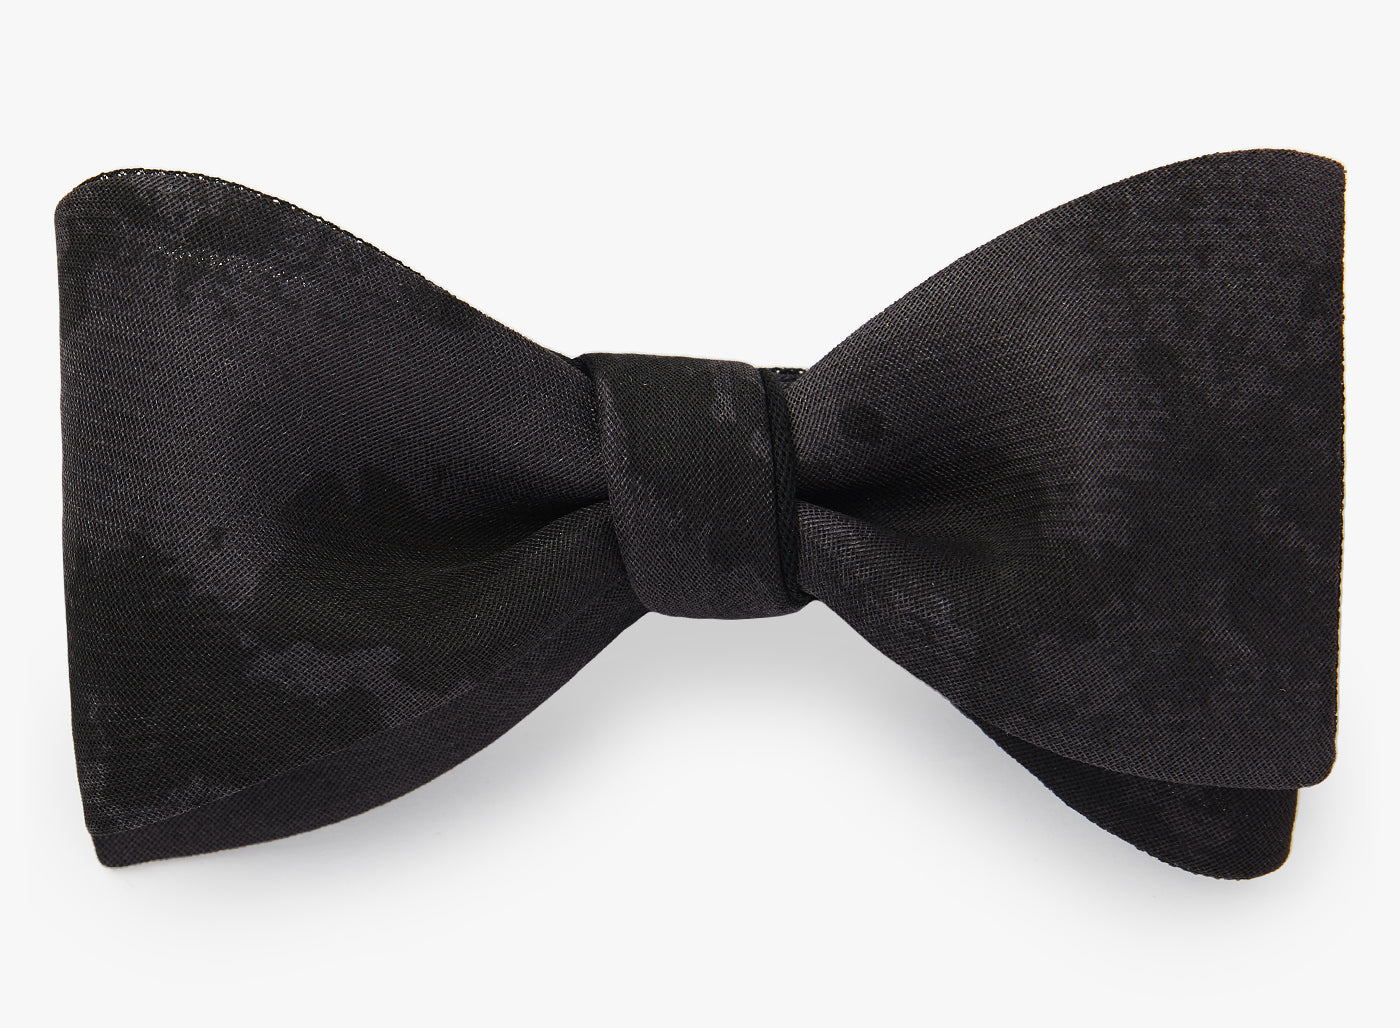 HAND-PAINTED BOWTIE 749